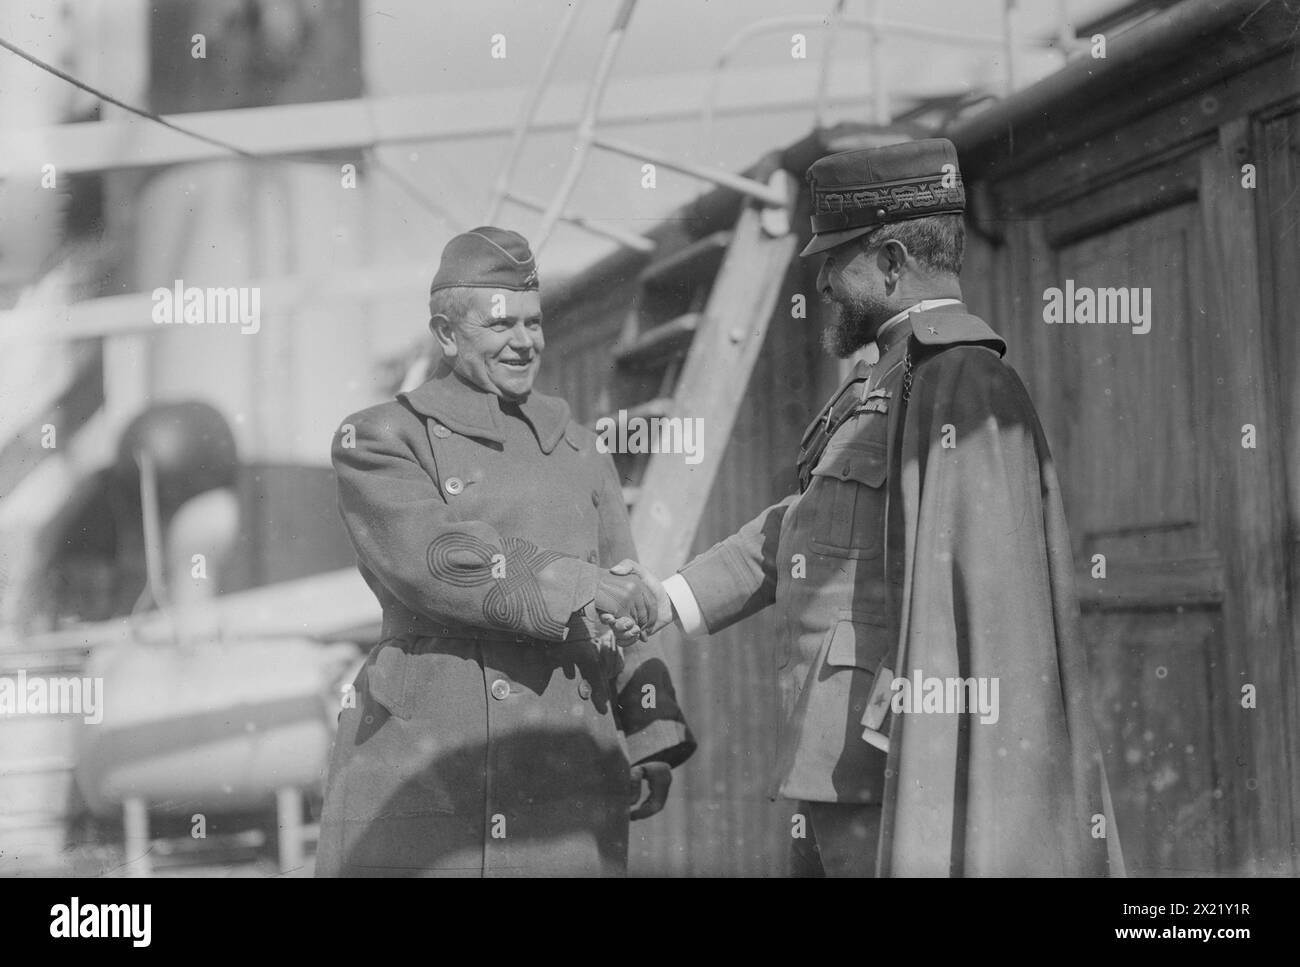 Col. Wm. Wallace &amp; Gen. Guglielmotti, Apr 1919. William Arthur Wallace (1867-1945), commander of the 332nd U.S. Infantry Regiment which served on the Italian front during World War I and returned to New York on the SS Duca d'Aosta on April 14, 1919. He is shaking hands with General Emilio Guglielmotti, Military Attache of the Royal Italian Embassy at Washington, D.C. Stock Photo